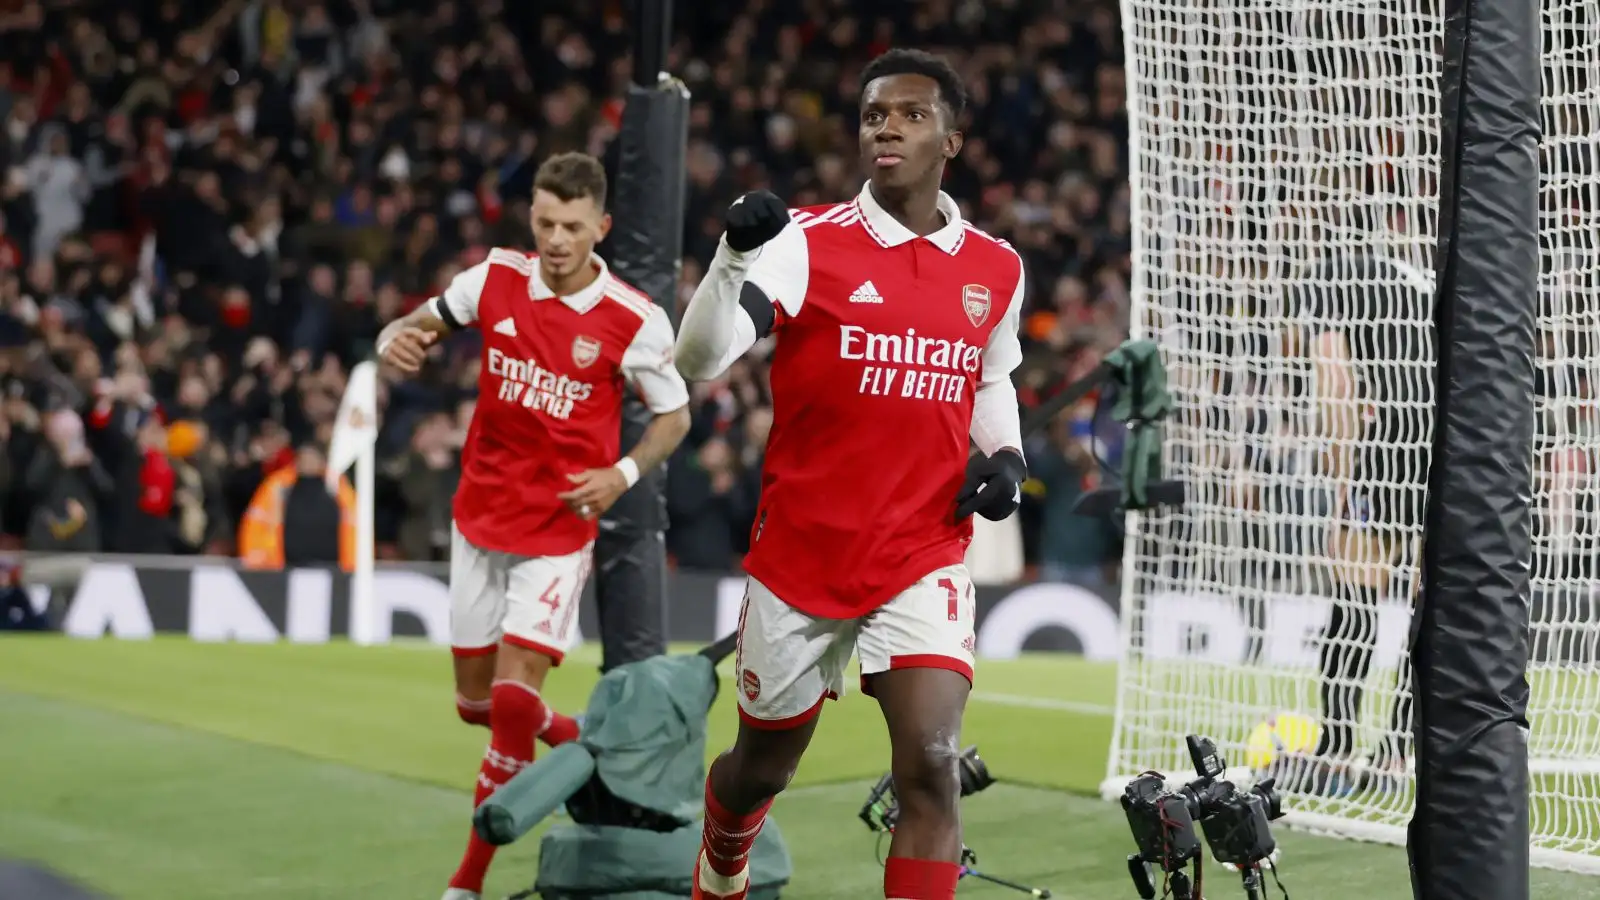 Eddie Nketiah celebrates after scoring for Arsenal in a 3-1 Premier League win over West Ham